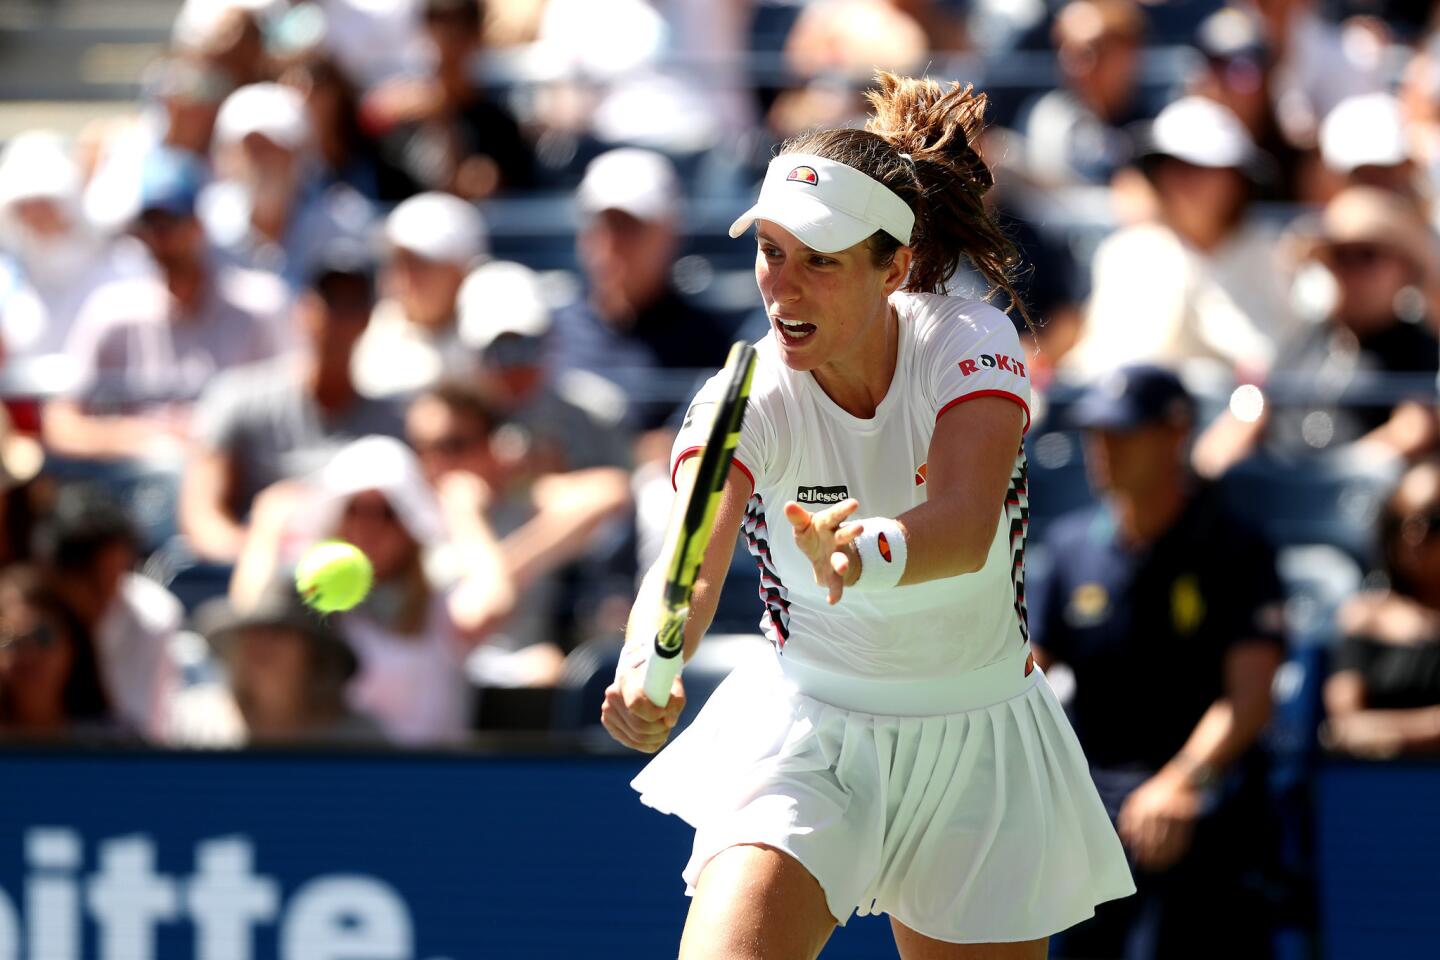 Johanna Konta of Great Britain returns a shot during her Women's Singles quarterfinal match against Elina Svitolina of Ukraine on day nine of the 2019 U.S. Open at the USTA Billie Jean King National Tennis Center on Sept. 3, 2019, in Queens.